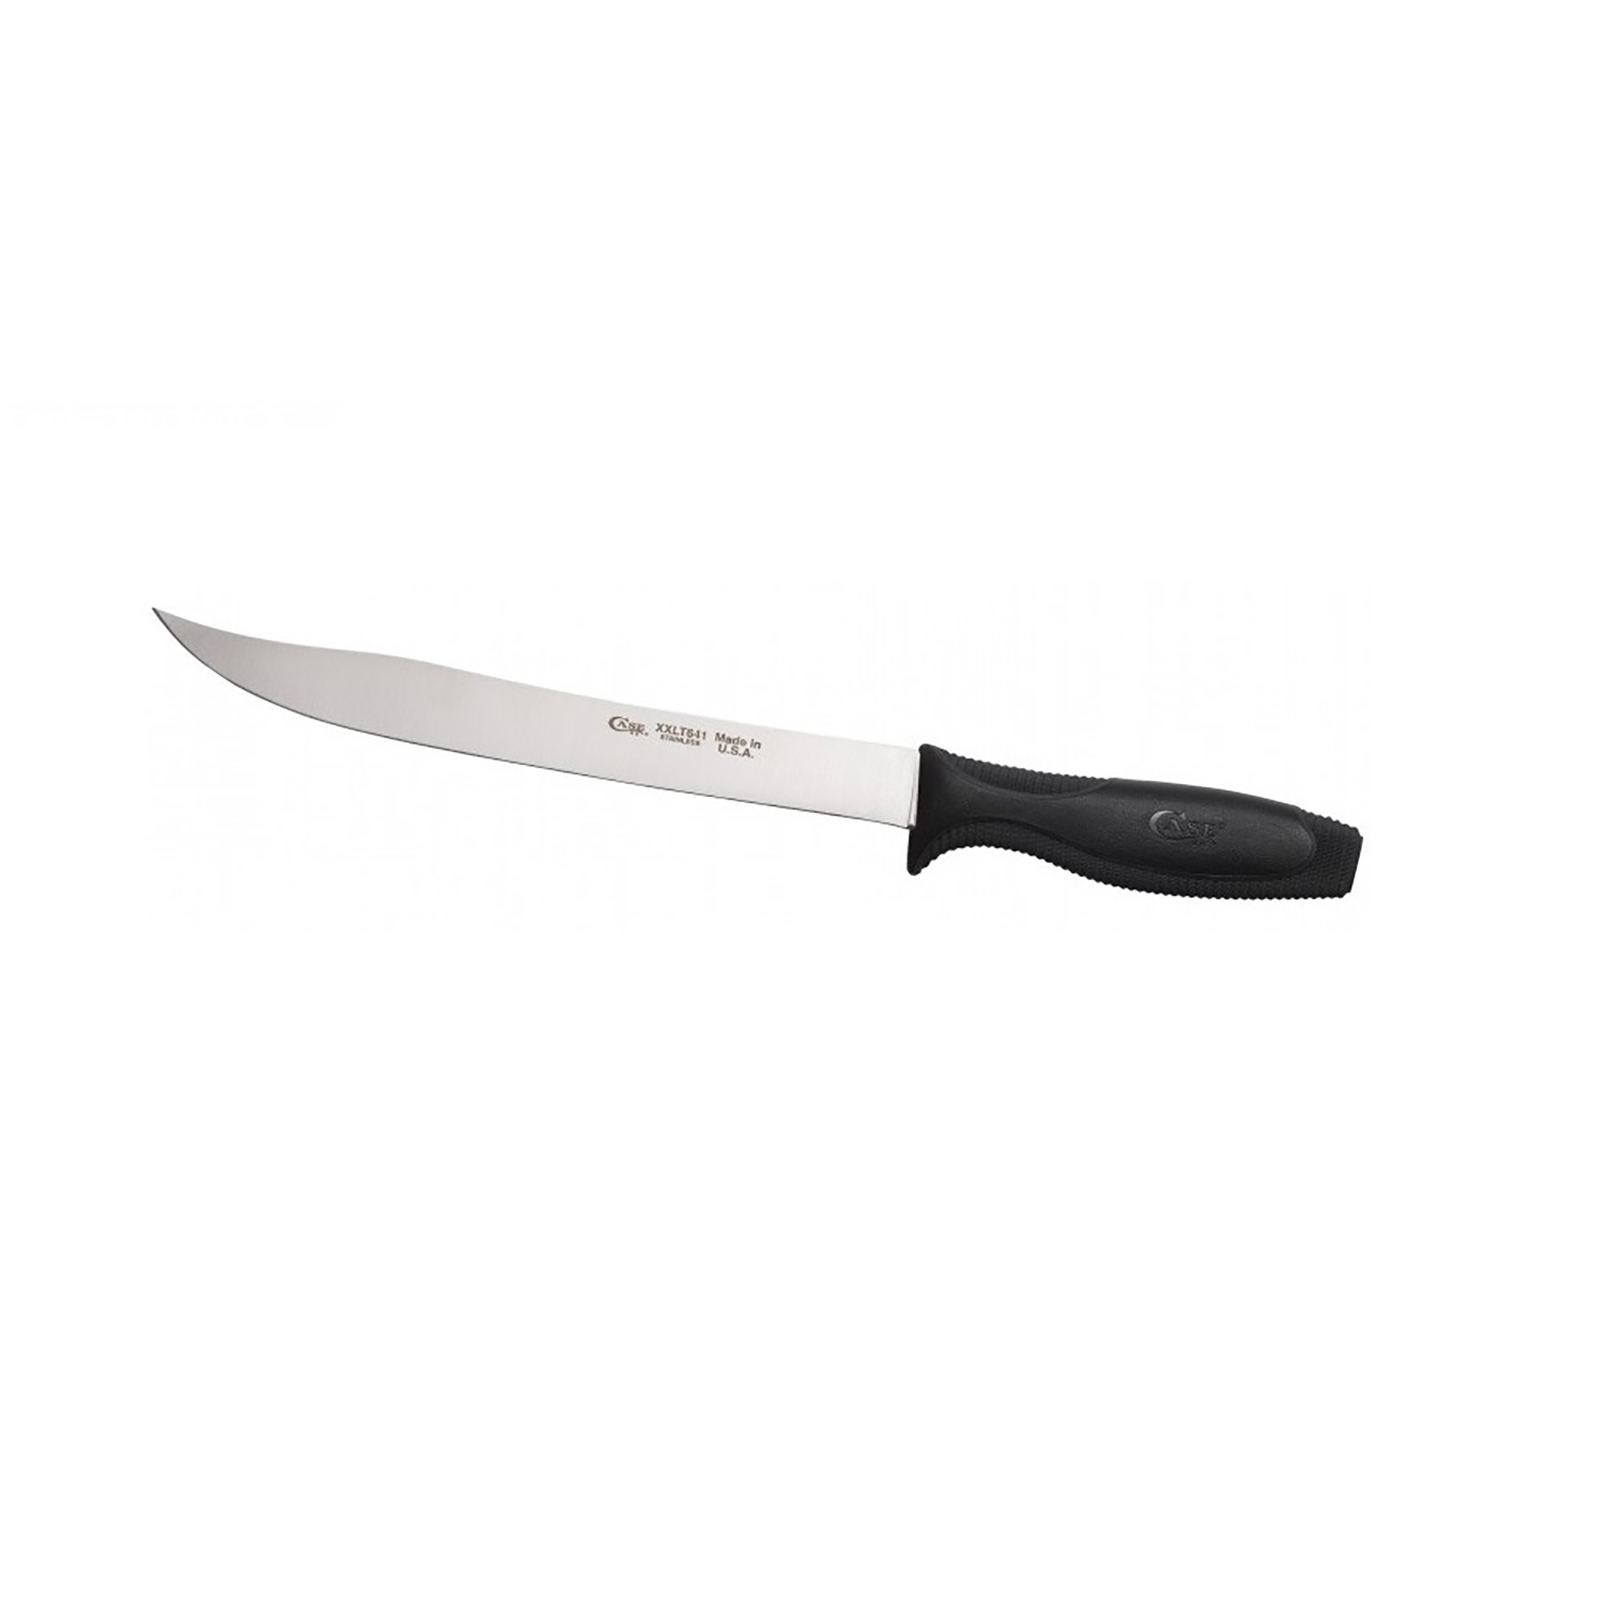 Case Knives Household Cutlery Kitchen Synthetic Slicing Knife - Black